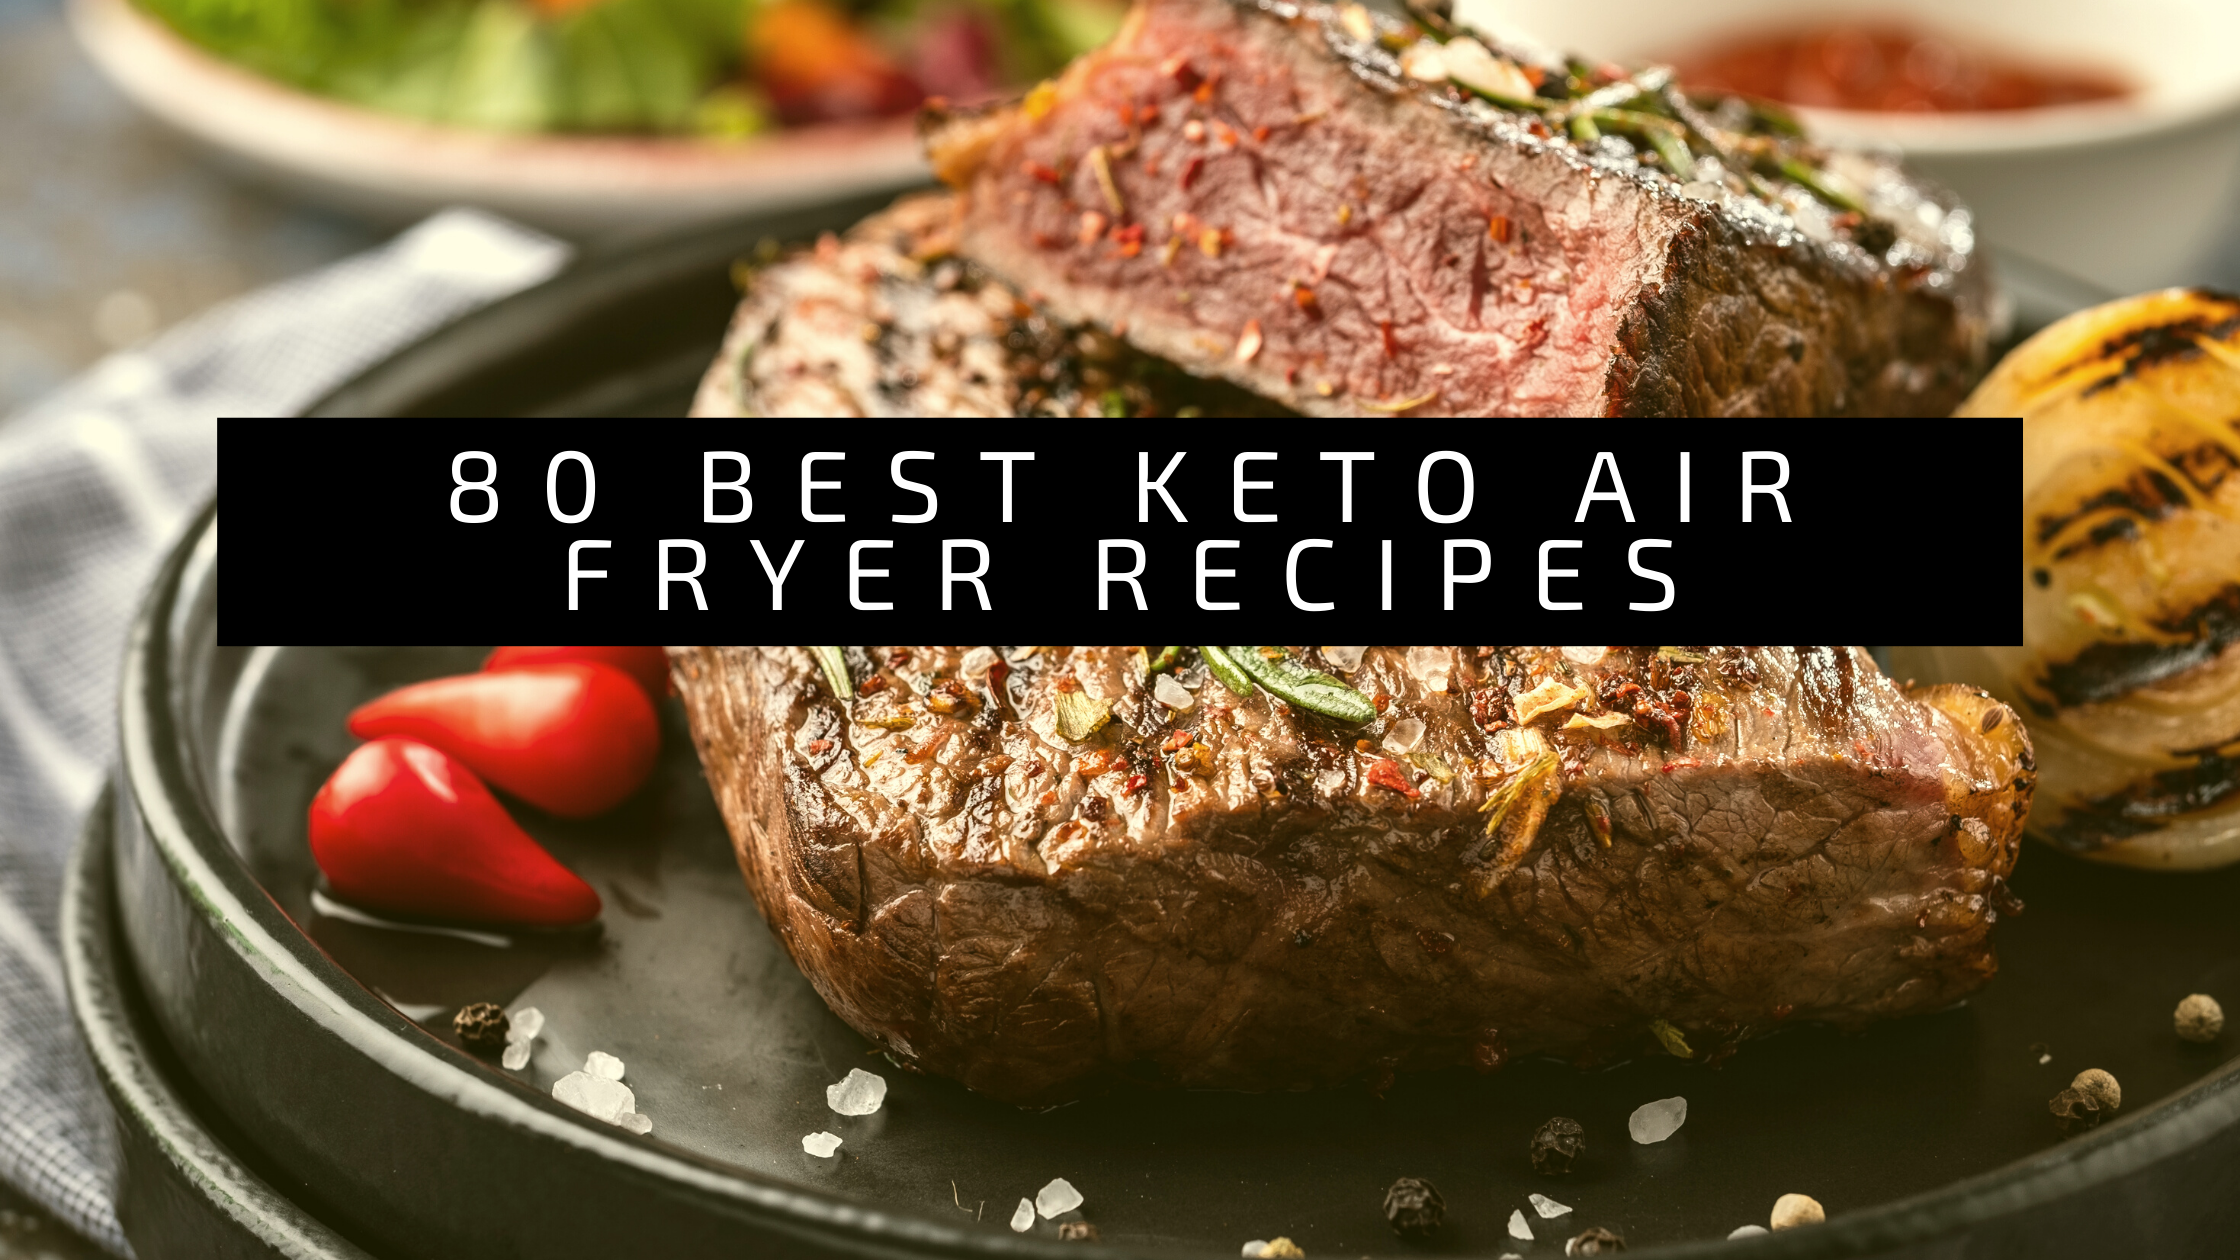 40 Family-Friendly Keto Air Fryer Recipes for Quick and Delicious Meals 25